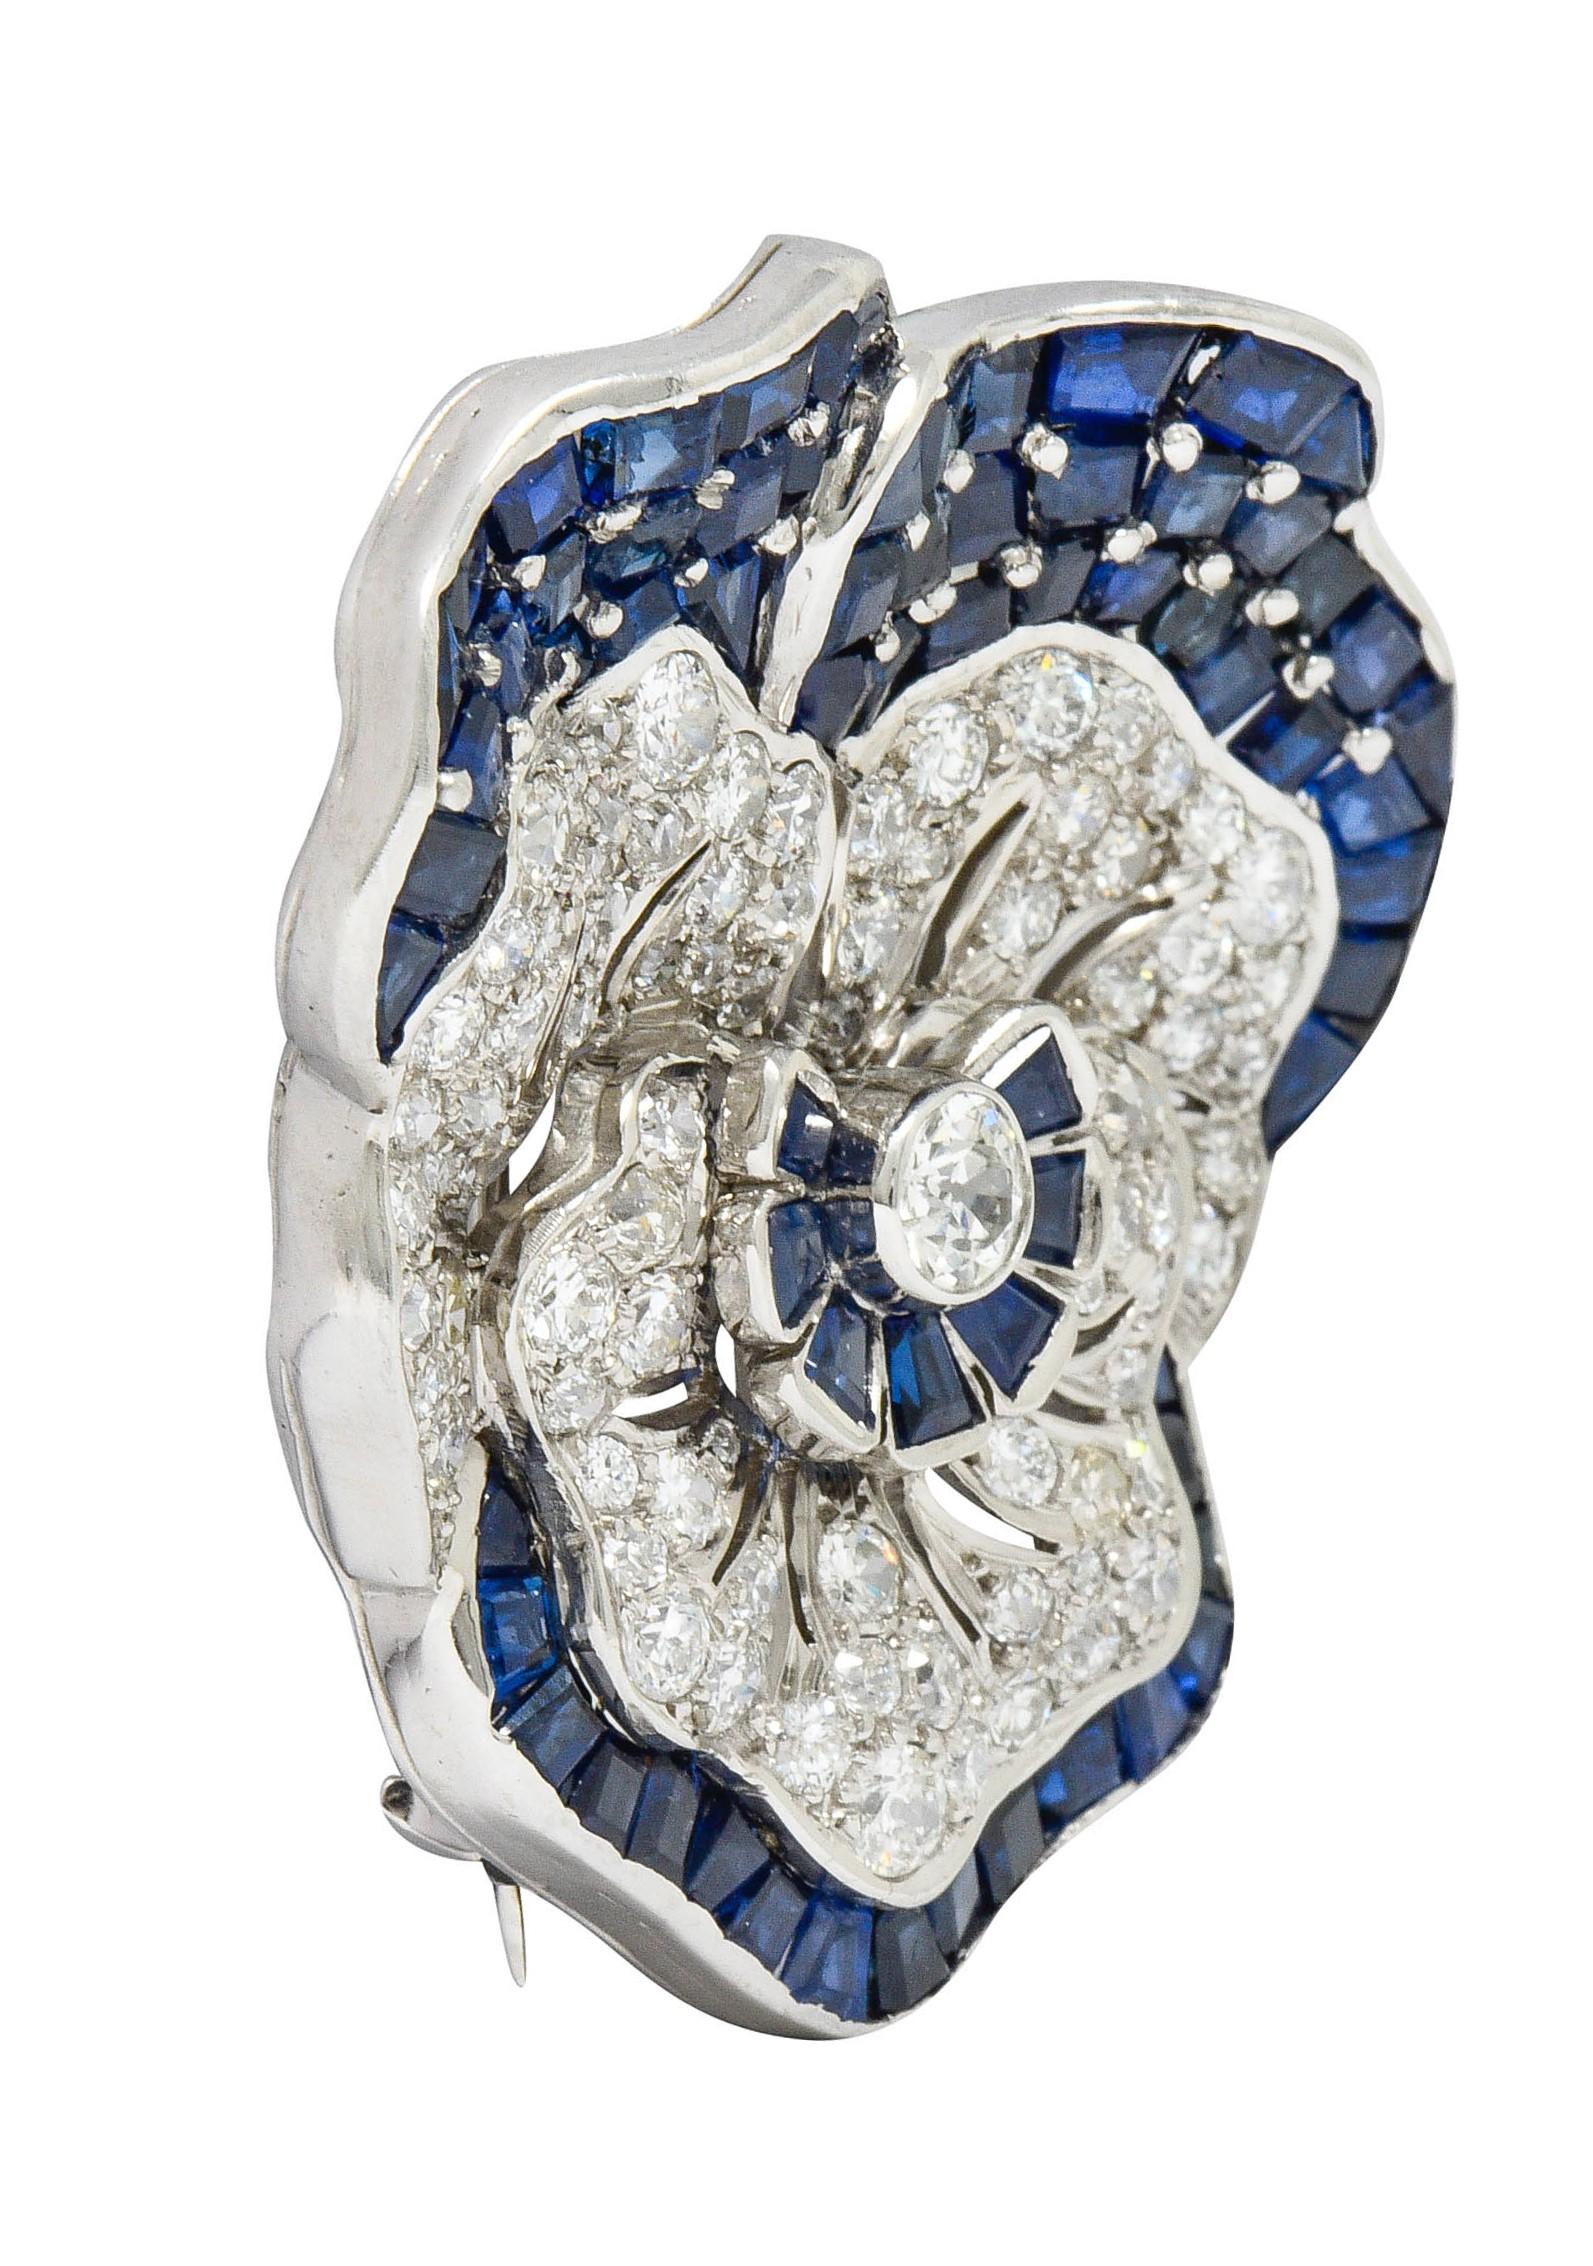 Flower brooch is designed as a dynamically petaled pansy

Centering a bezel set old European cut diamond weighing approximately 0.40 carat; K color with SI clarity

Surrounded by gemmed petals comprised of diamonds and sapphires

Total additional